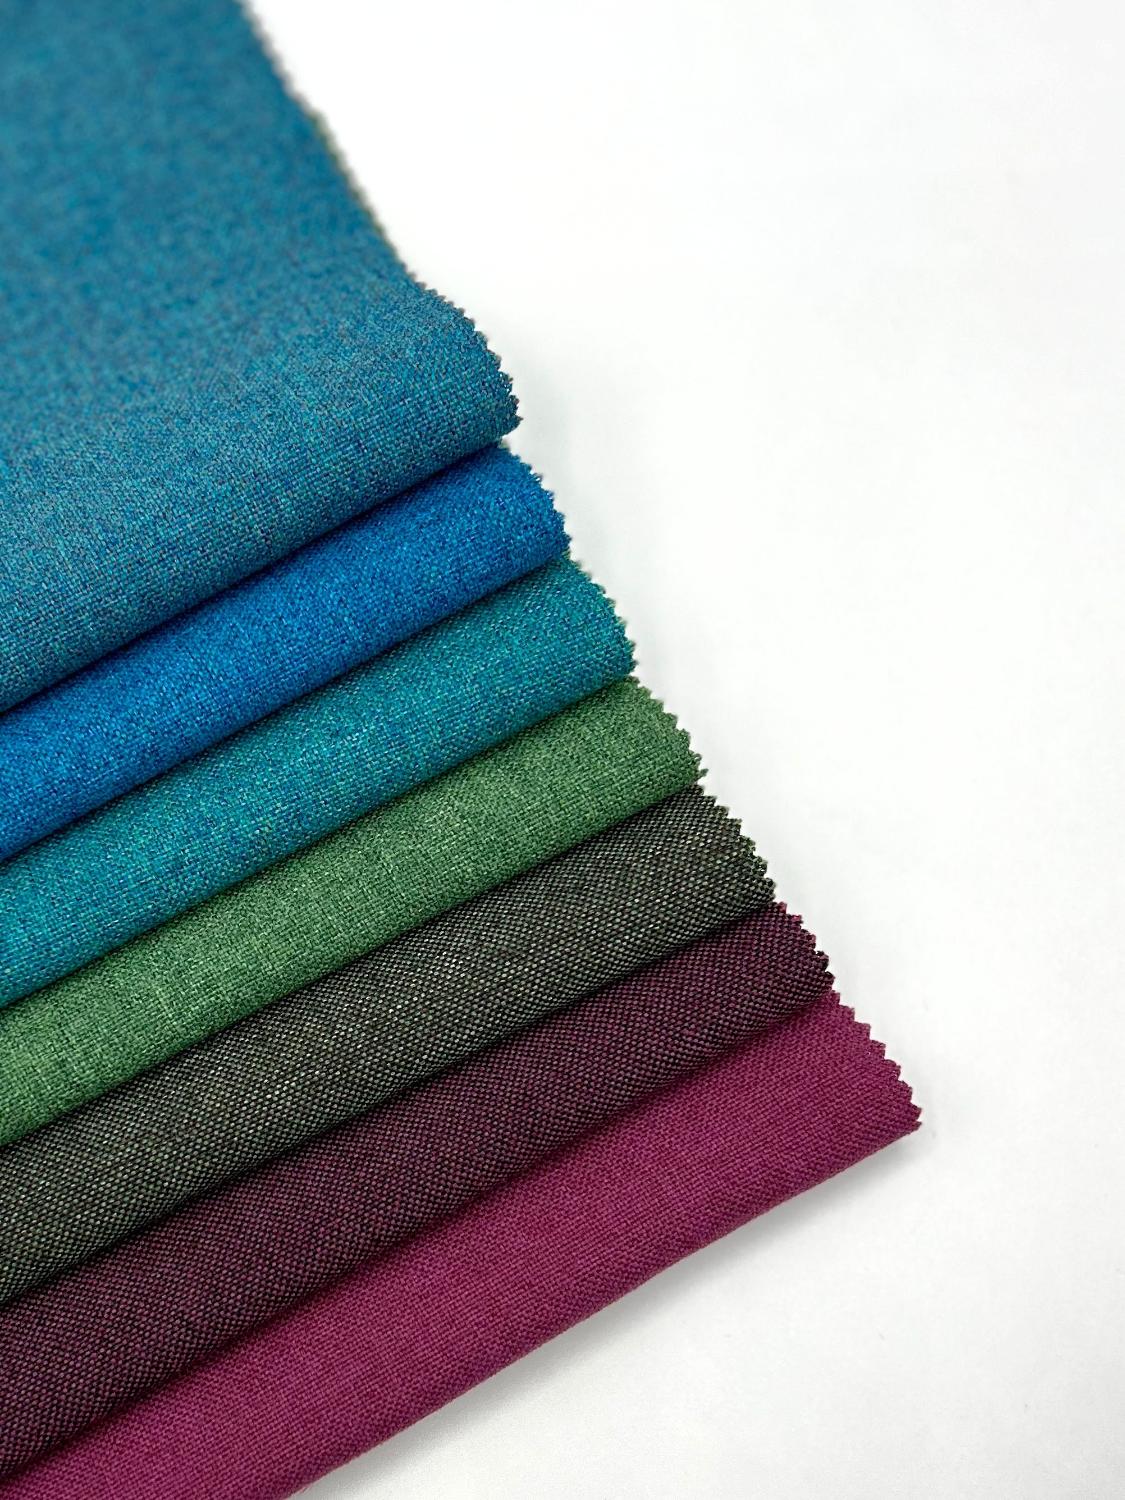 New colors for Roccia fabric in our Collection!